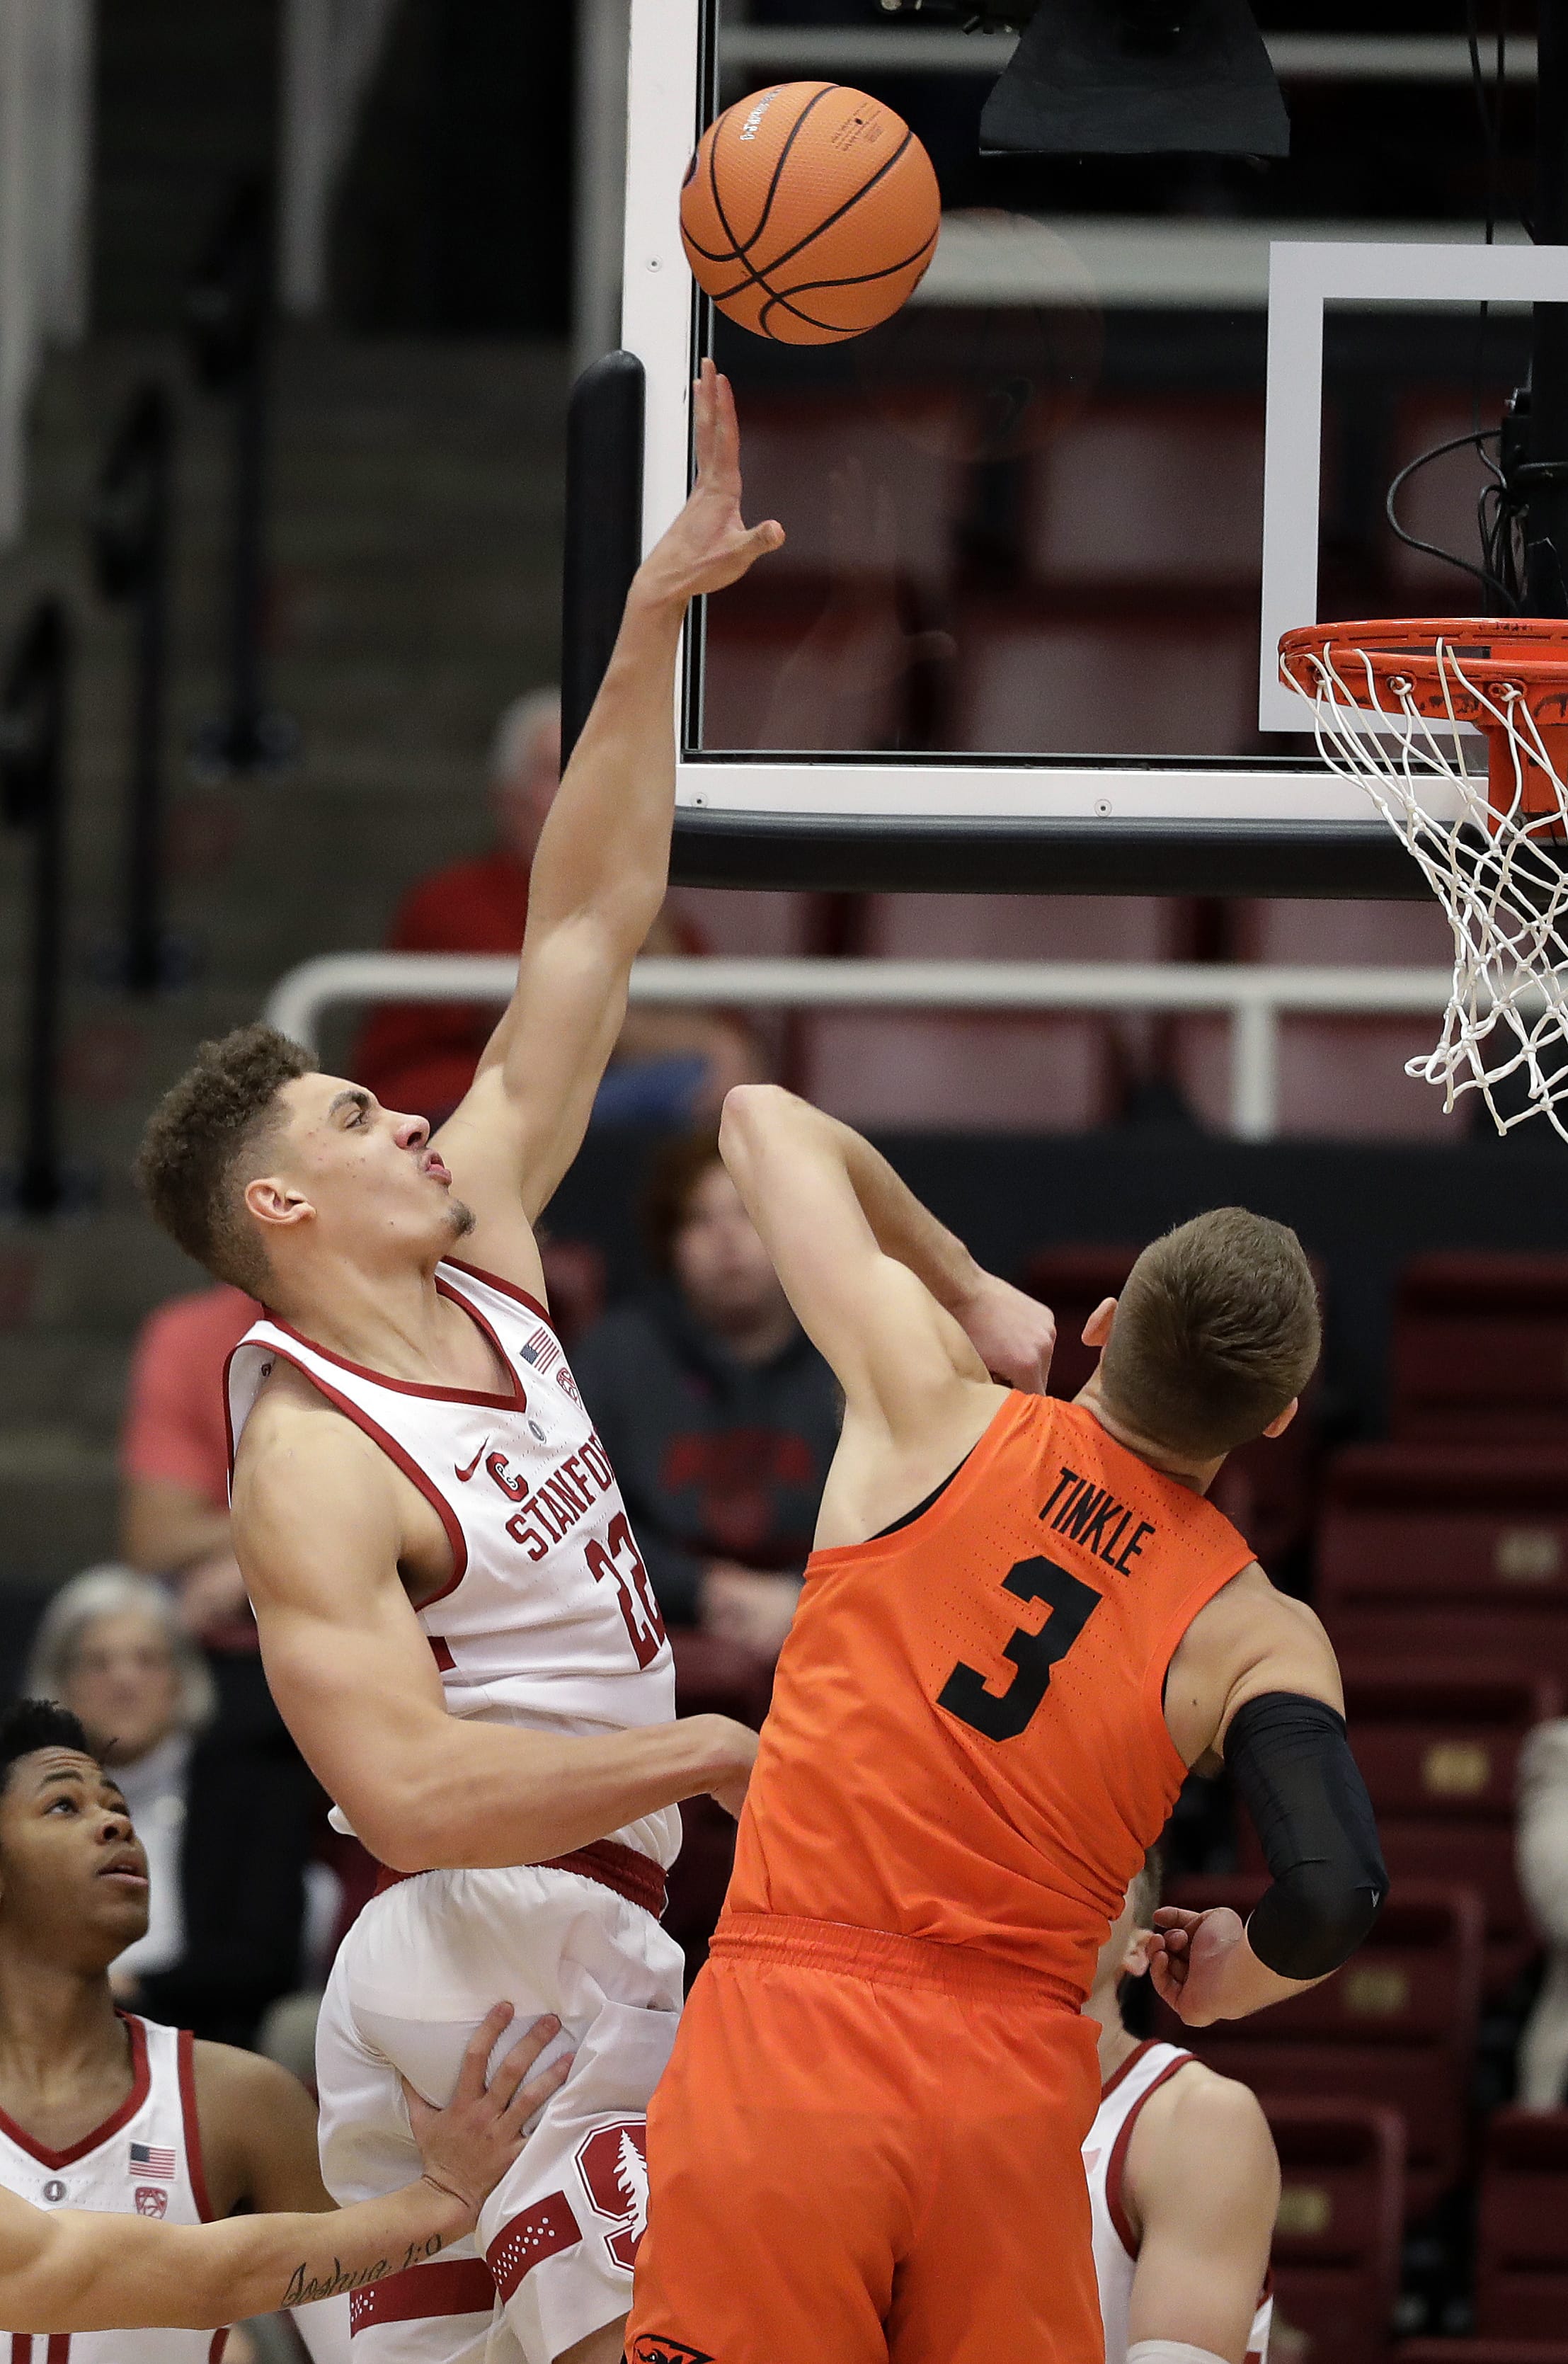 Stanford forward Reid Travis, left, shoots over Oregon State forward Tres Tinkle (3) during the first half of an NCAA college basketball game Thursday, Feb. 1, 2018, in Stanford, Calif.